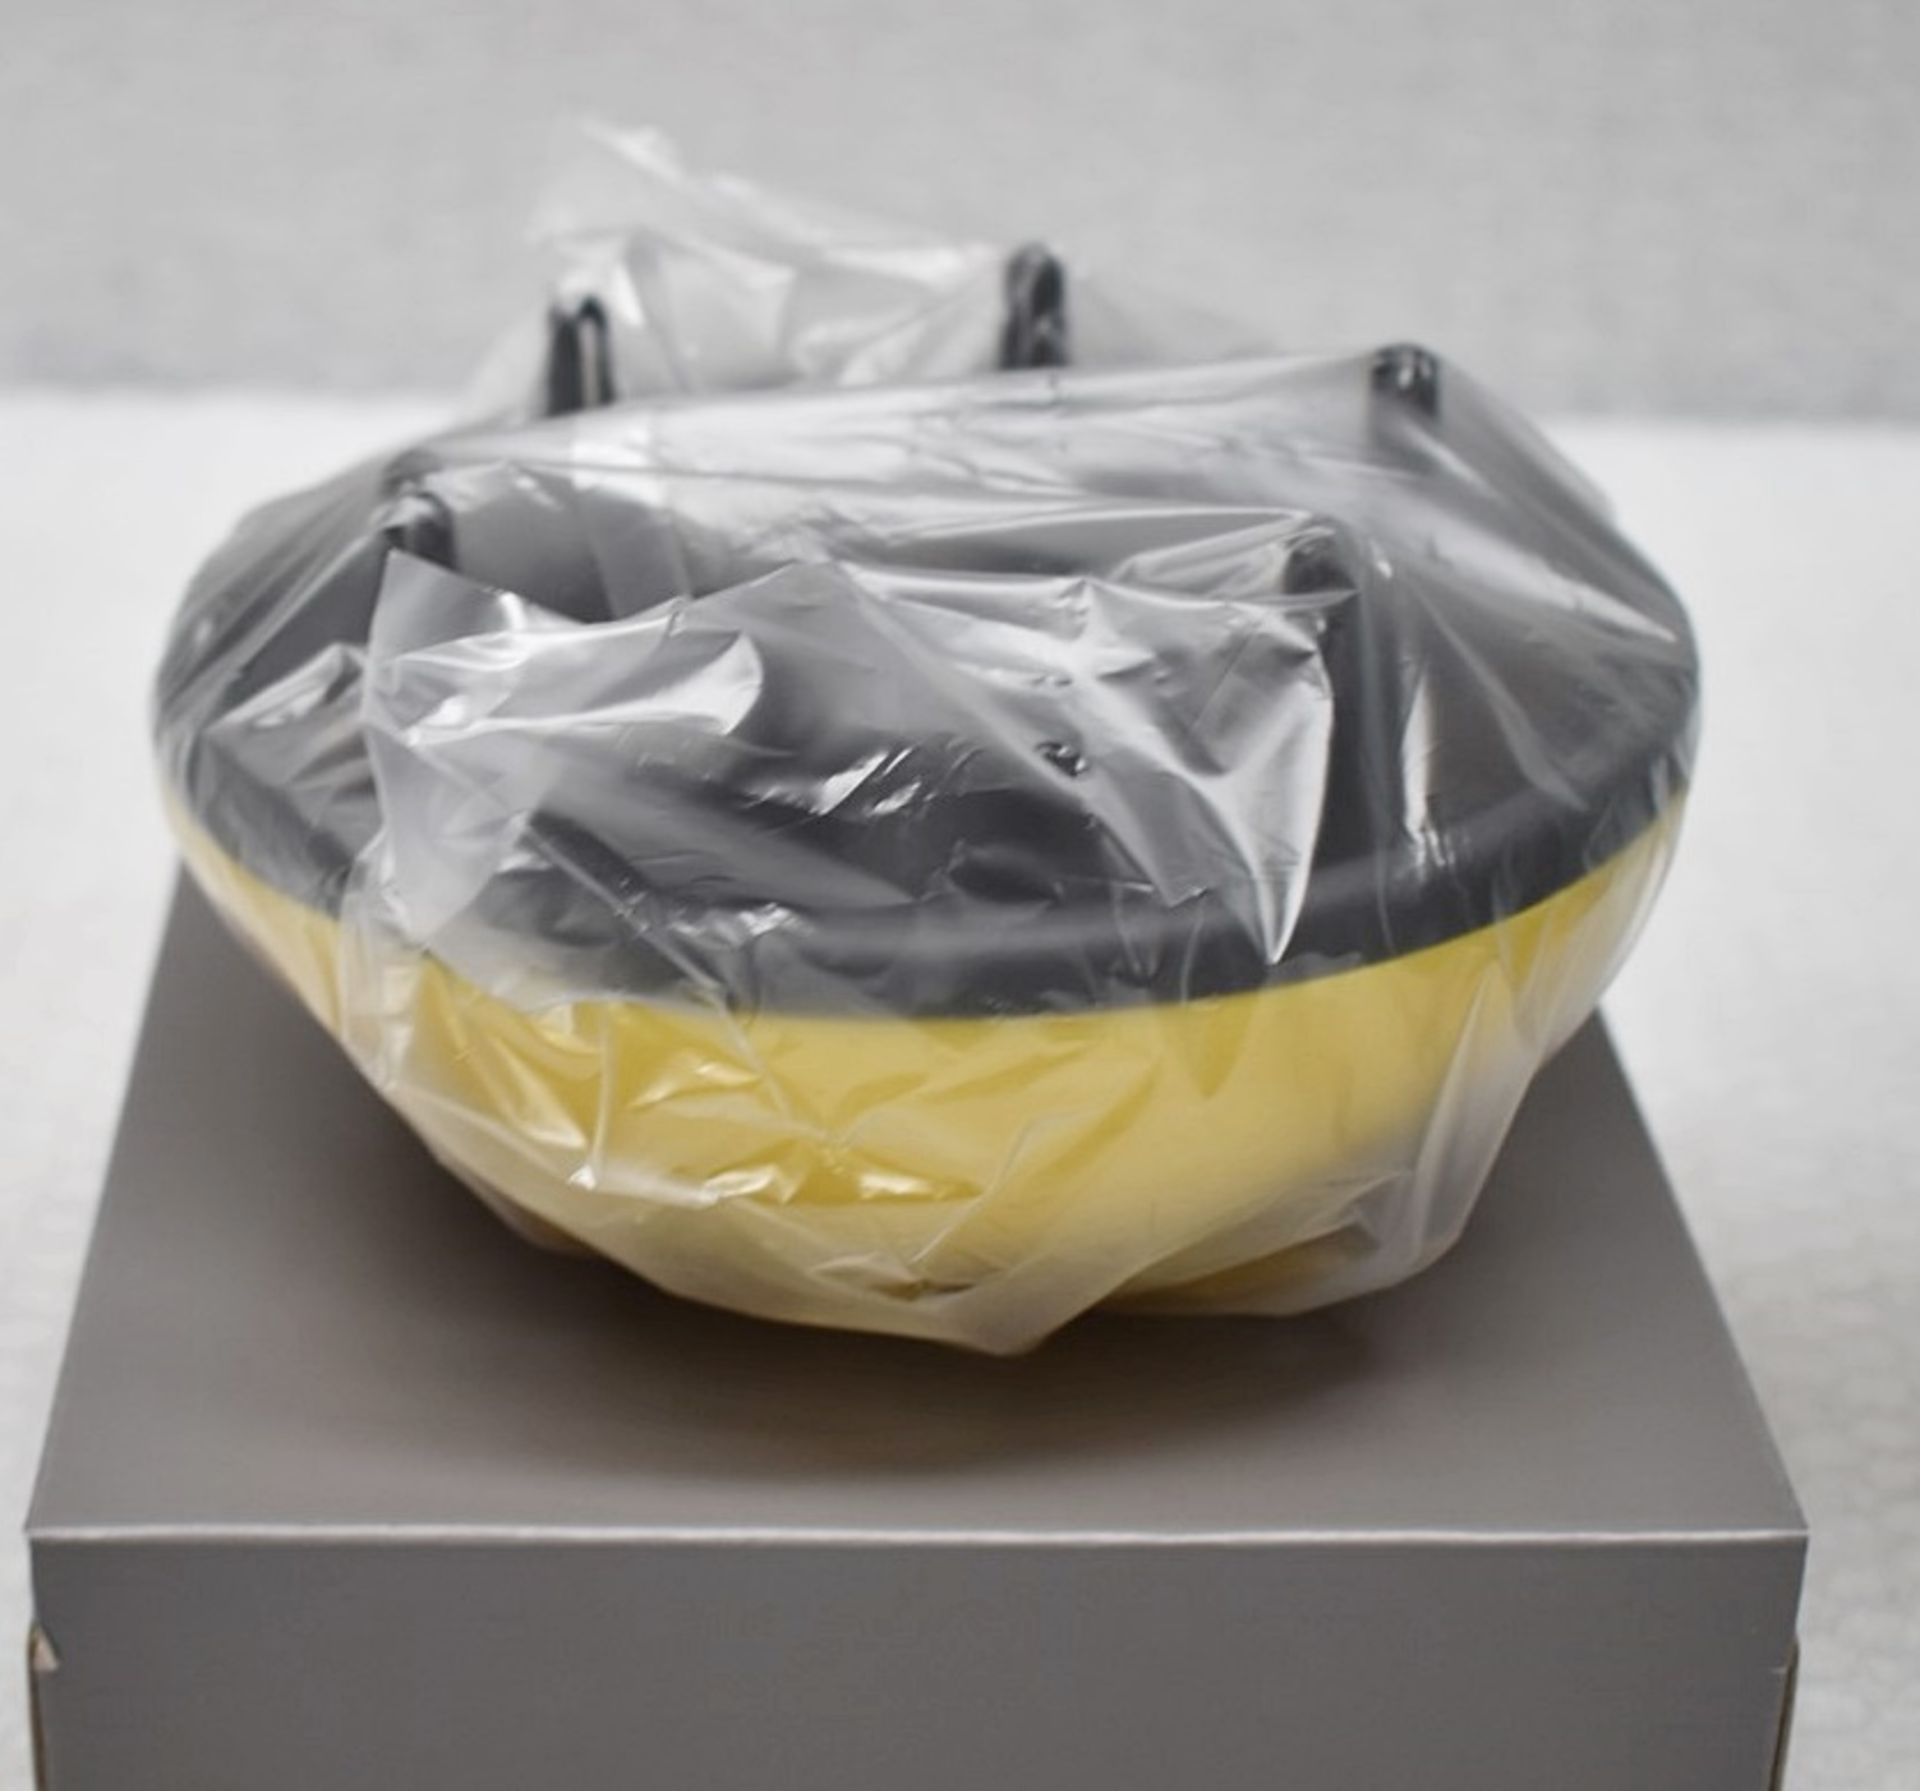 1 x DRYBAR The Bouncer Diffuser - Unused Boxed Stock - Ref: 6832450/HAS2246/WH2-C7/02-23-2 - CL987 - - Image 4 of 9